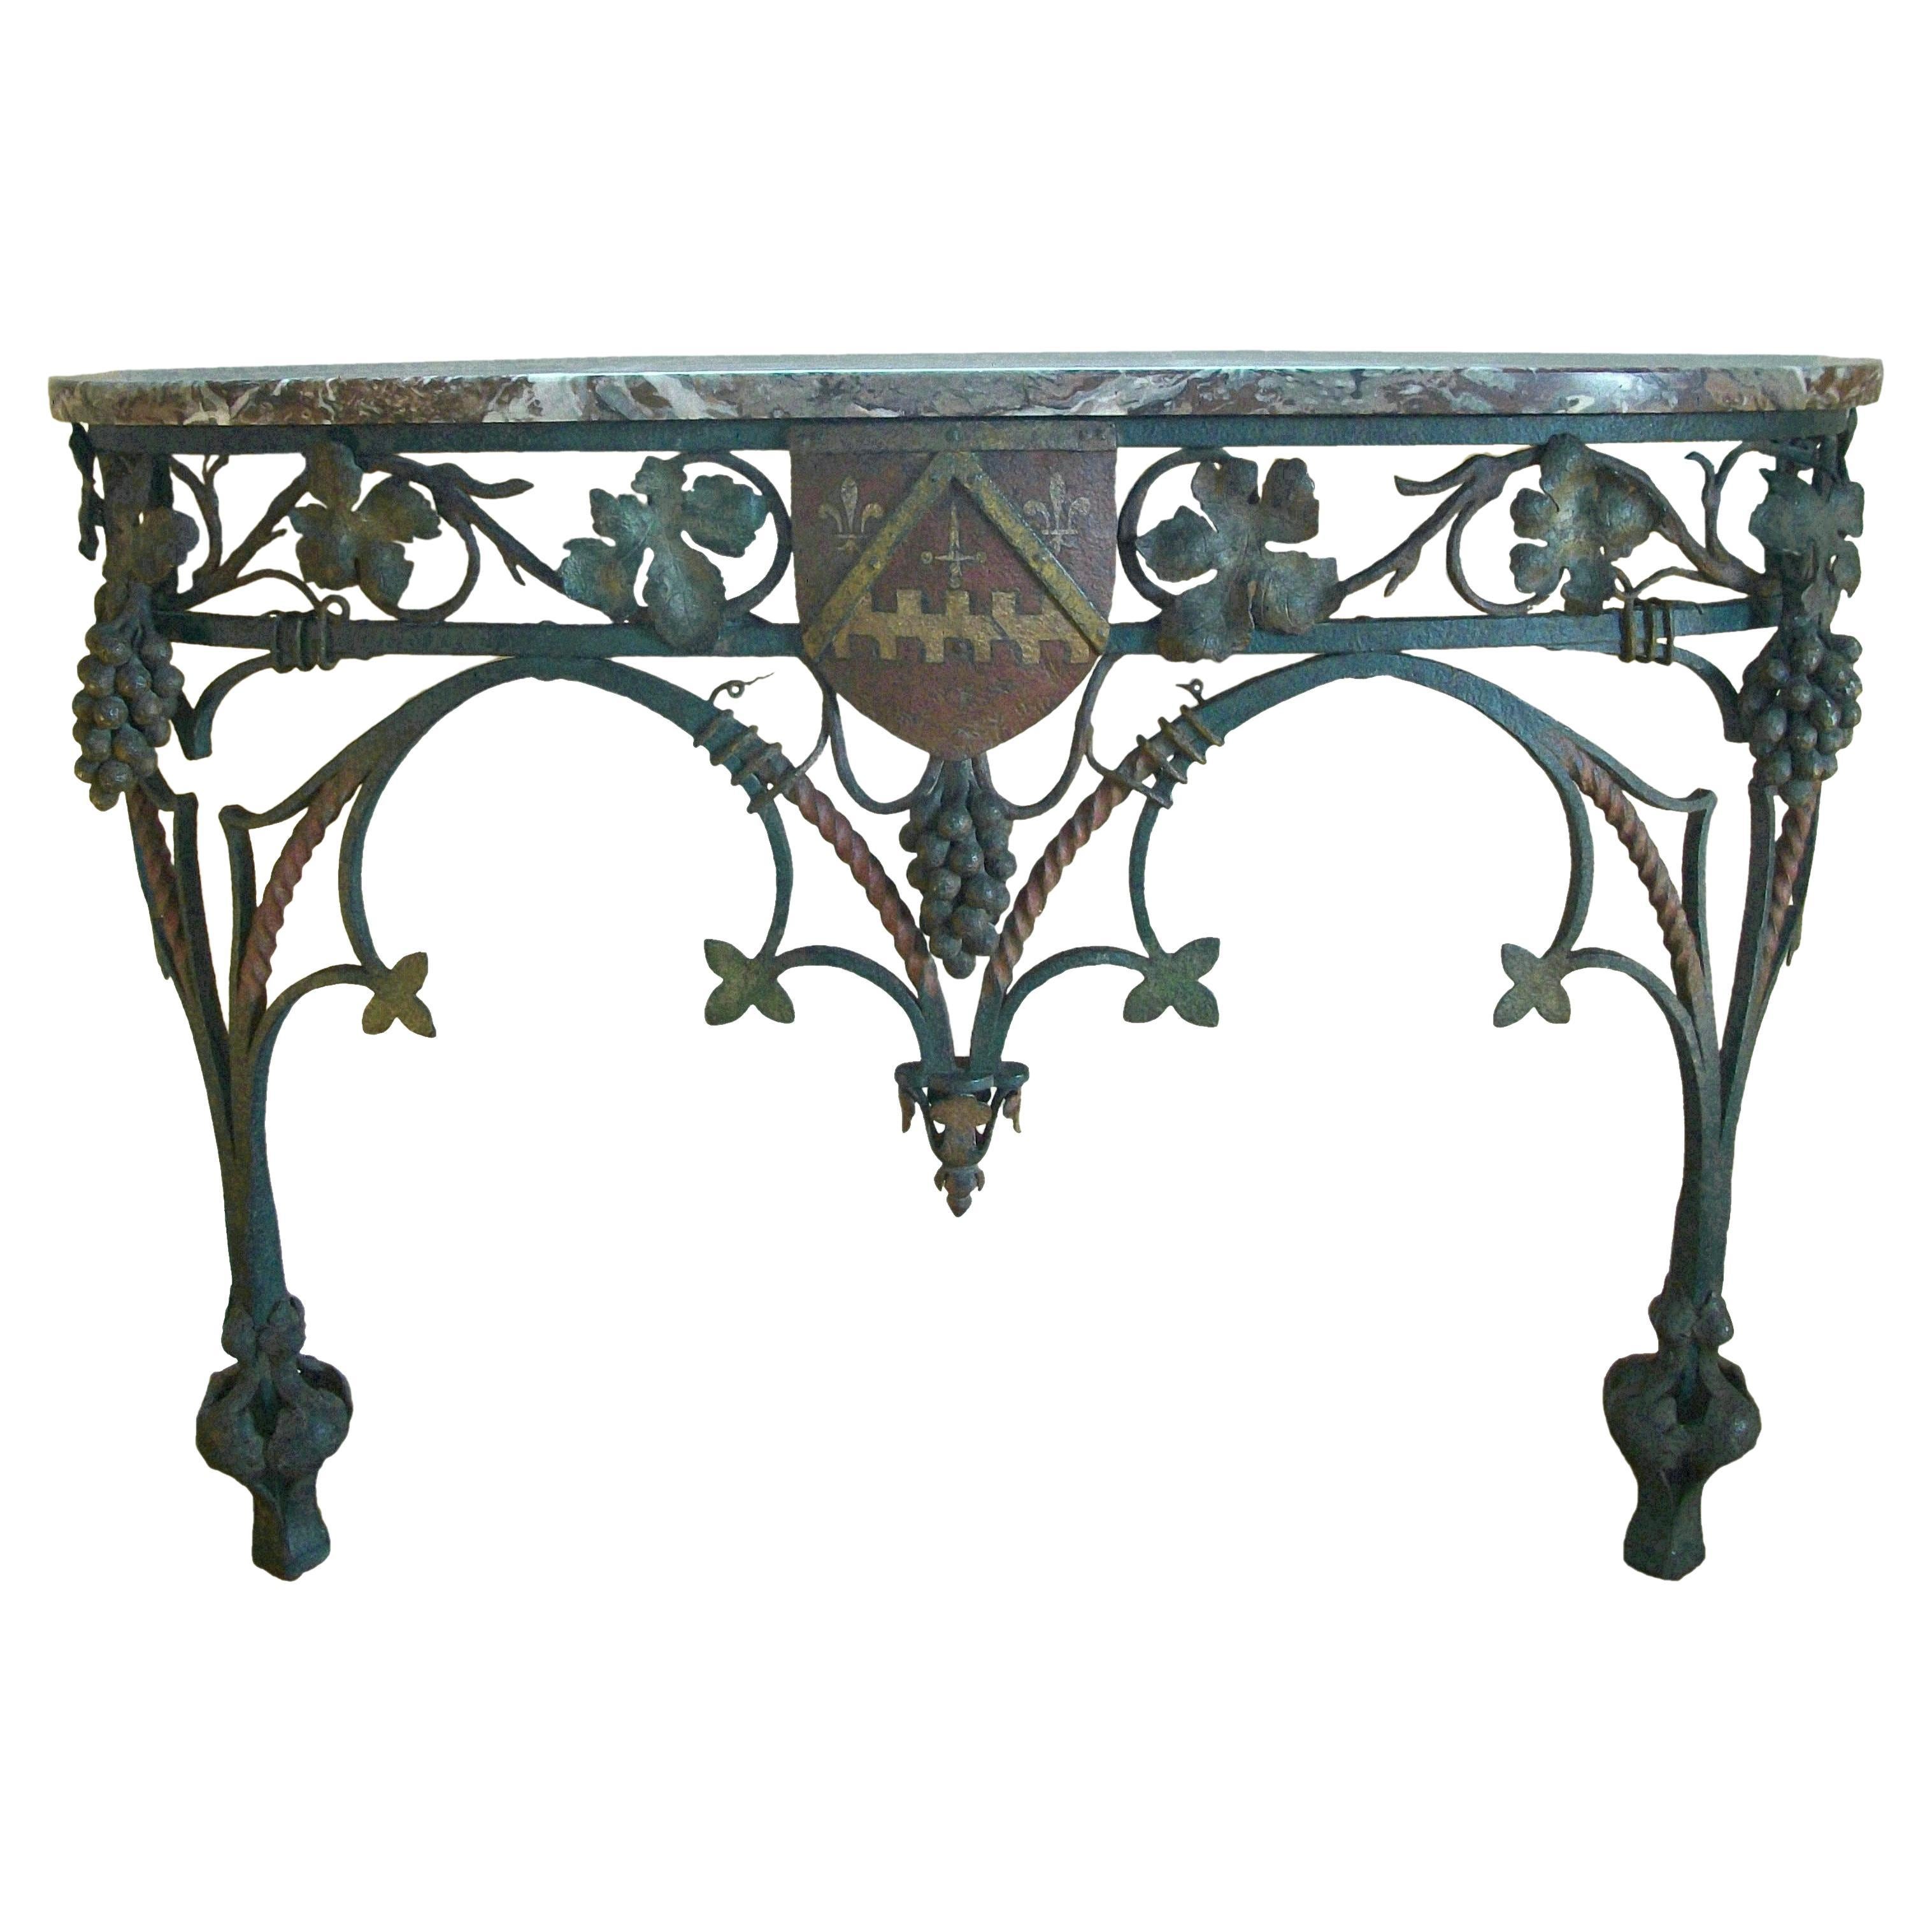 Neo Gothic Wrought Iron & Marble Console Table with Crest, France, circa 1850